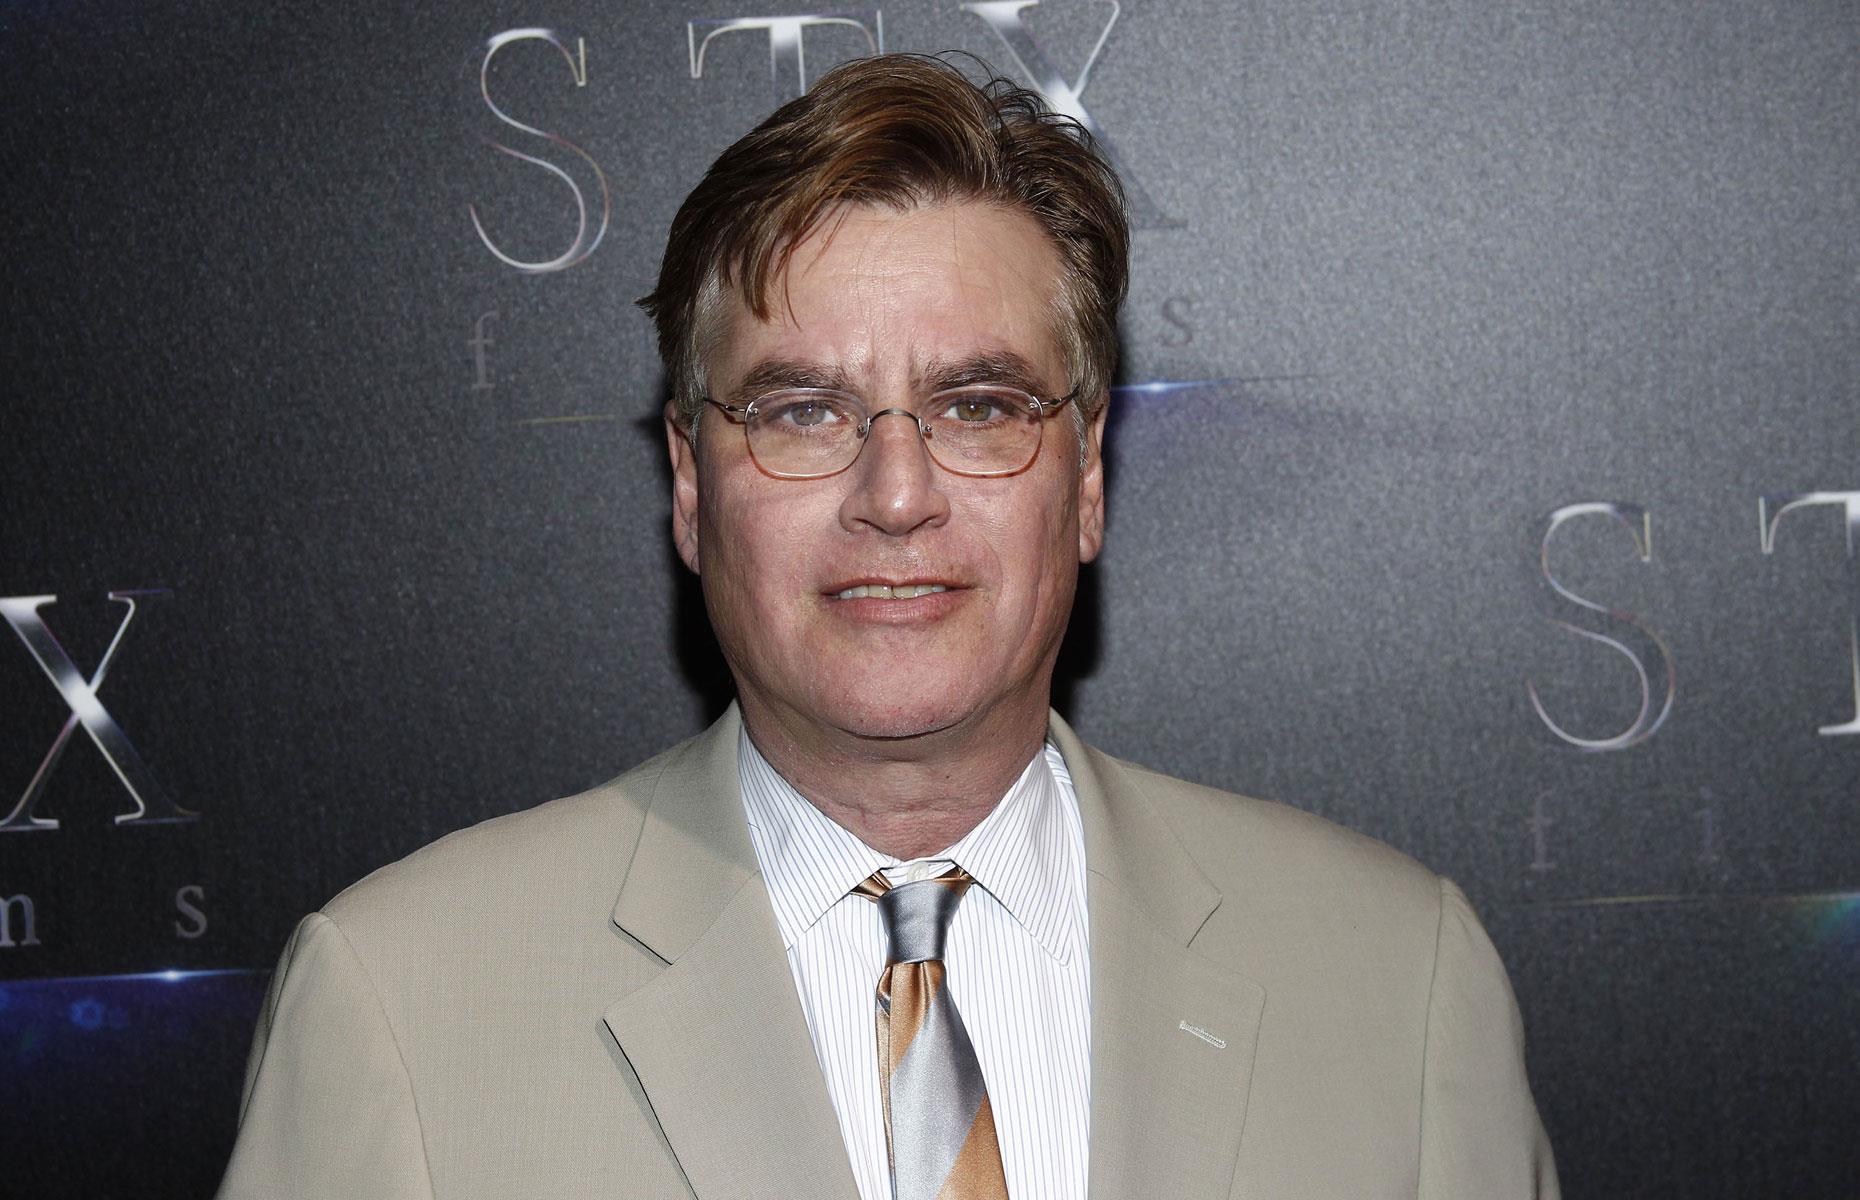 Aaron Sorkin acts out his scripts in front of a mirror